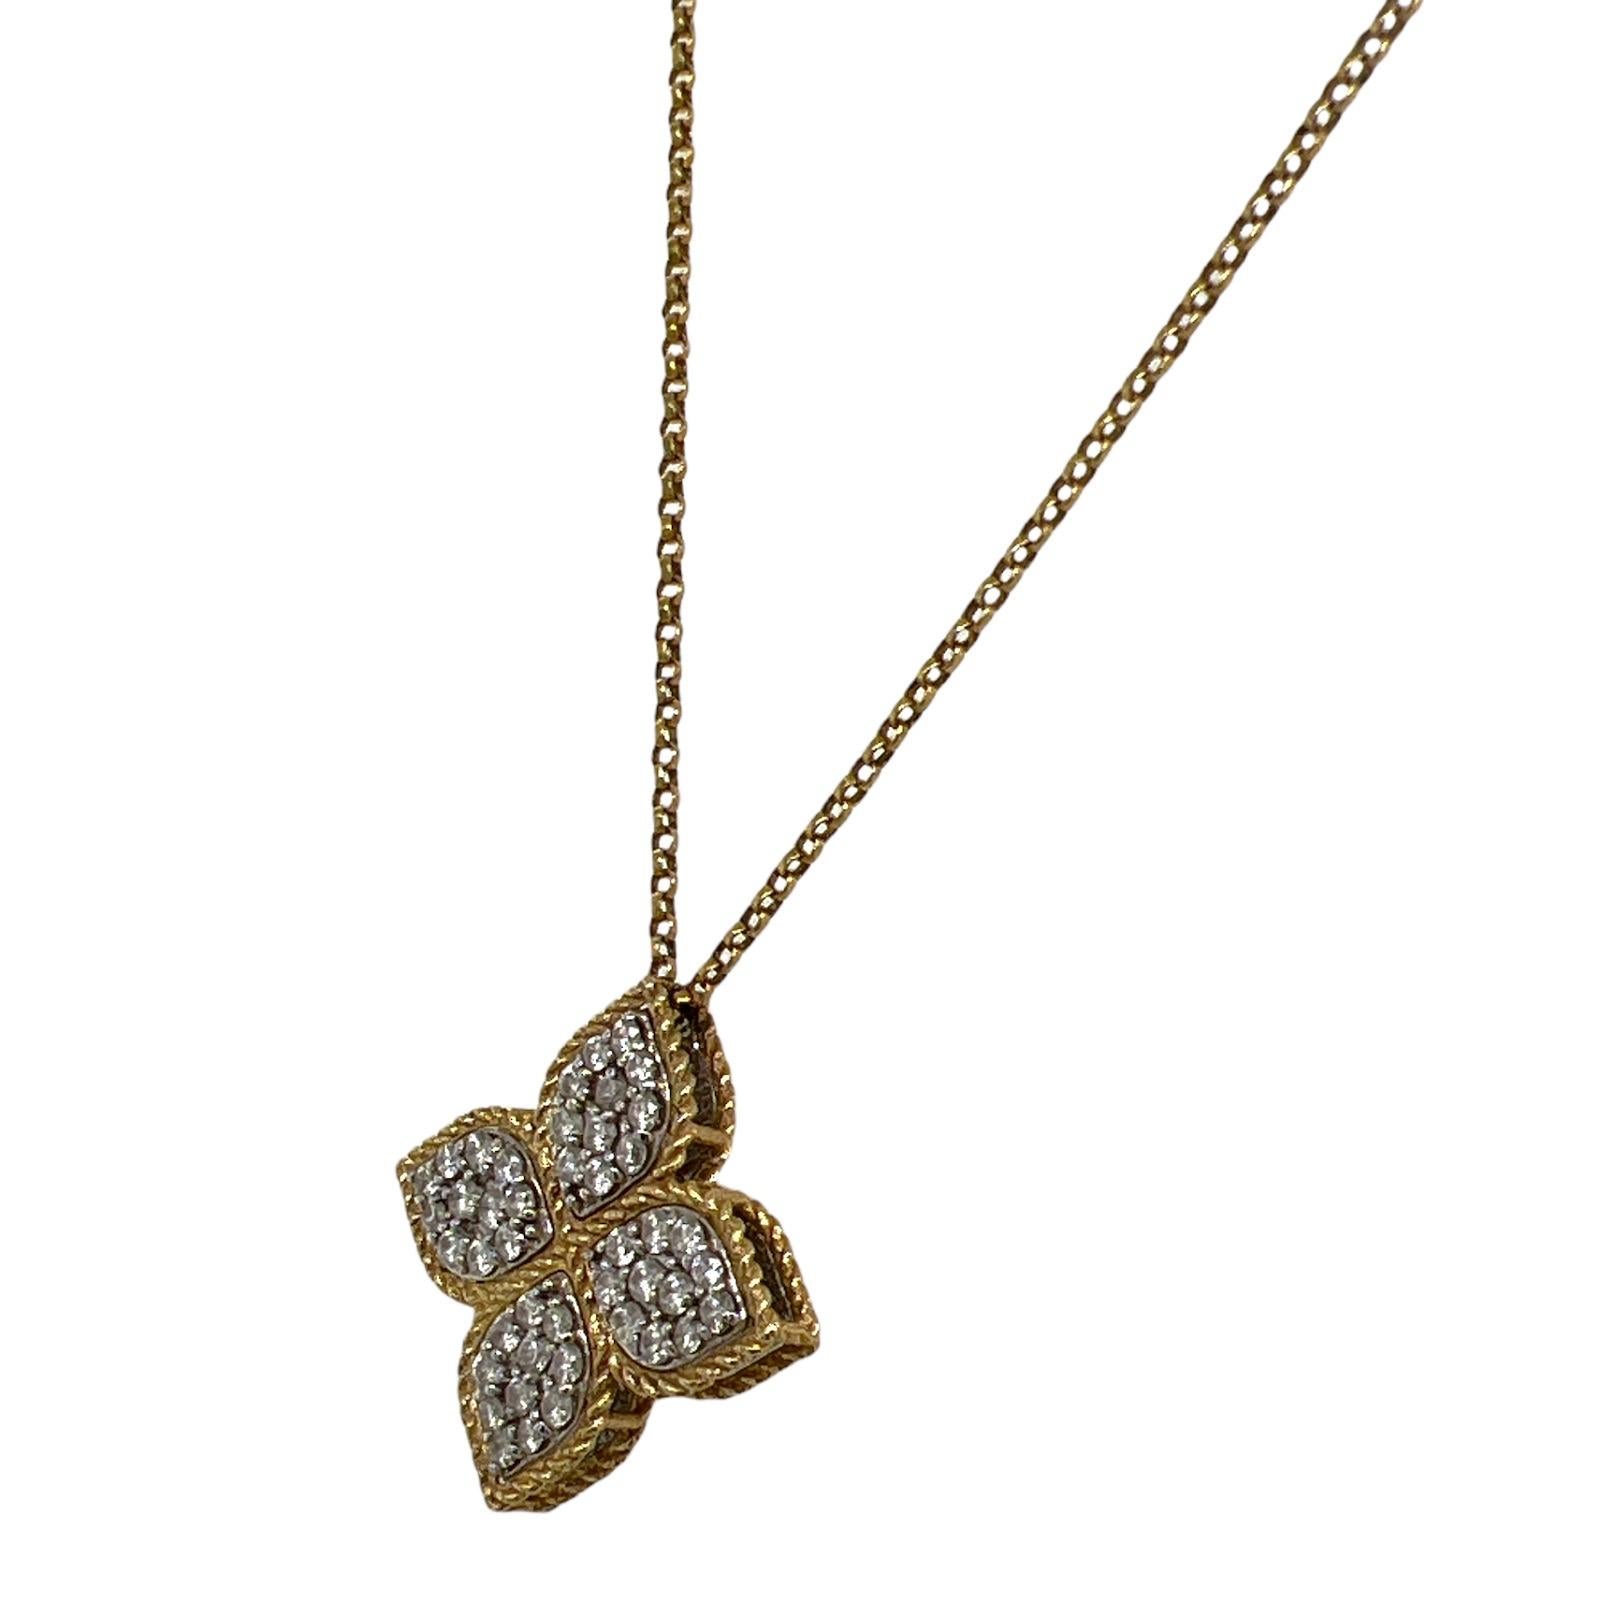 Roberto Coin large diamond flower pendant fashioned in 18 karat yellow gold. The pendant features round brilliant cut diamonds weighing .45 carat total weight and graded F-G color and VS clarity. The pendant measures .75 inches in length and the